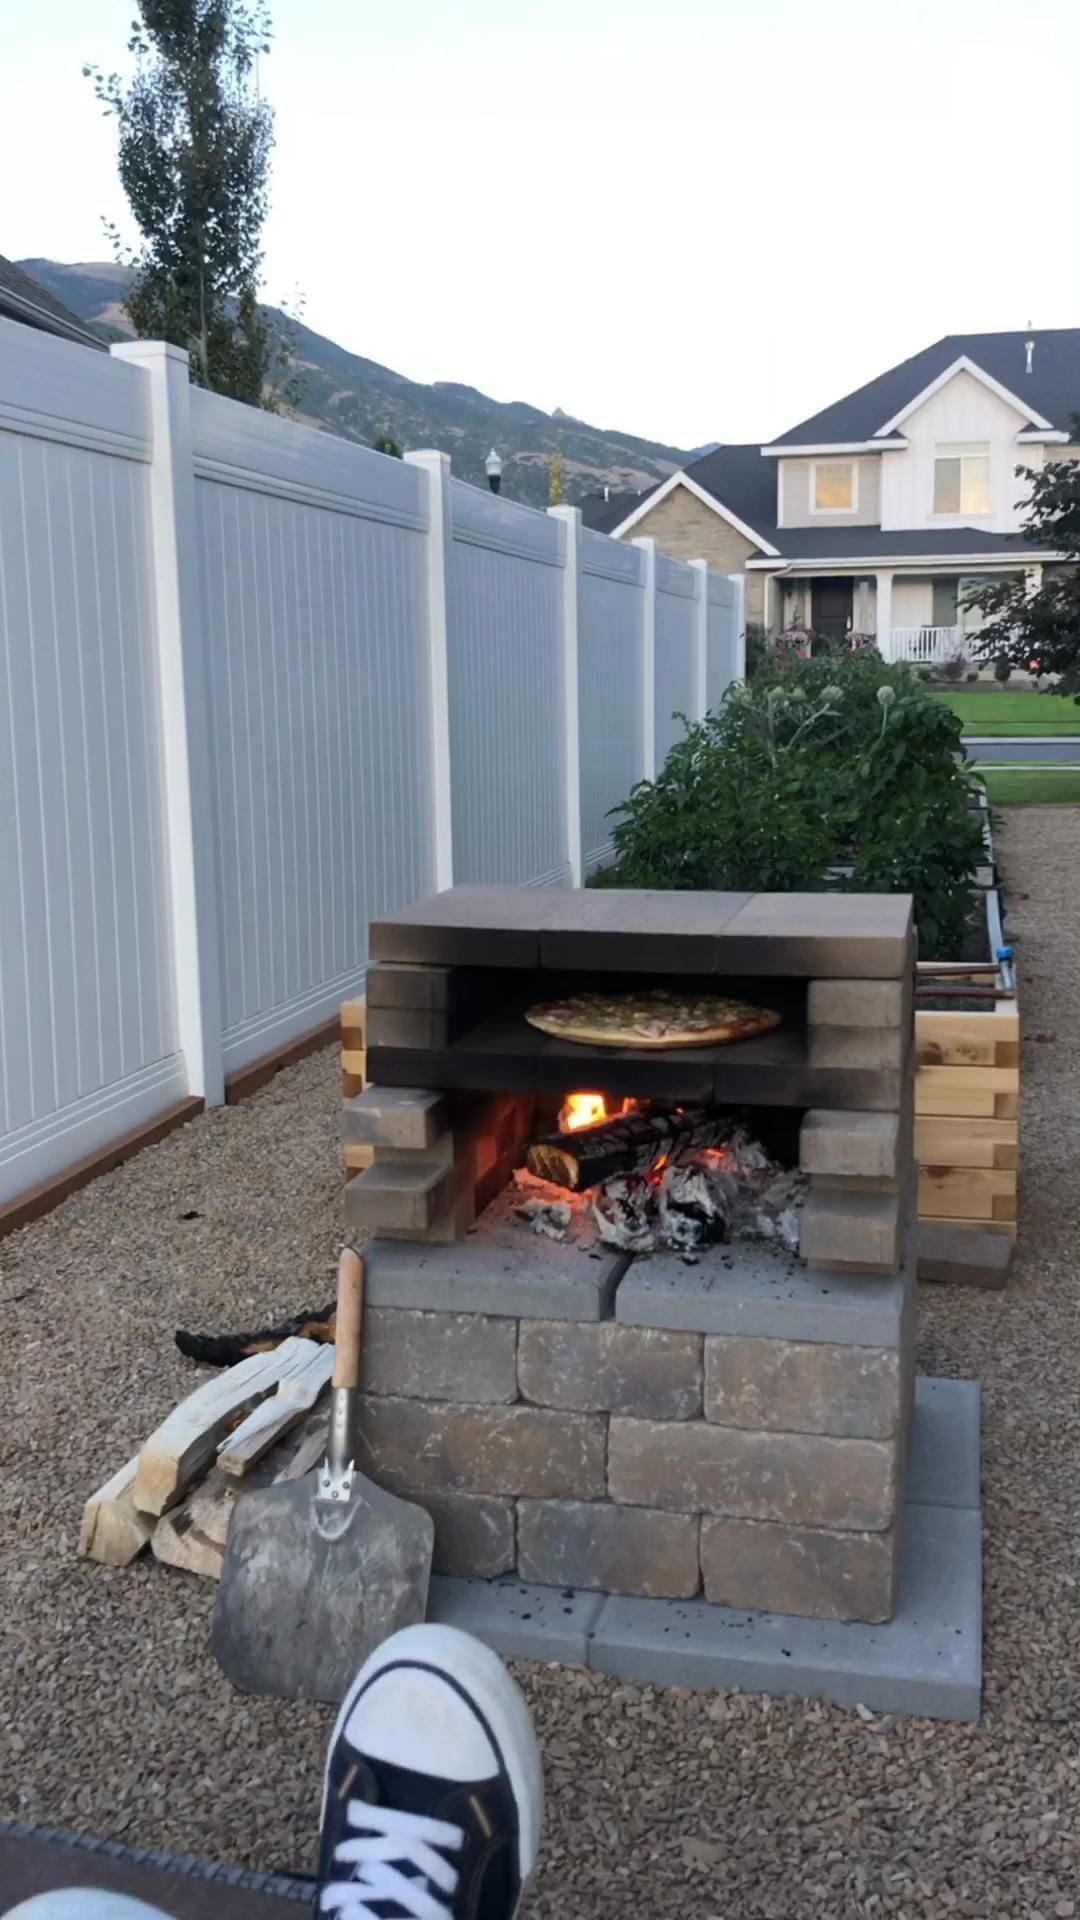 How to Build an Outdoor Pizza Oven -   17 diy Outdoor fireplace ideas